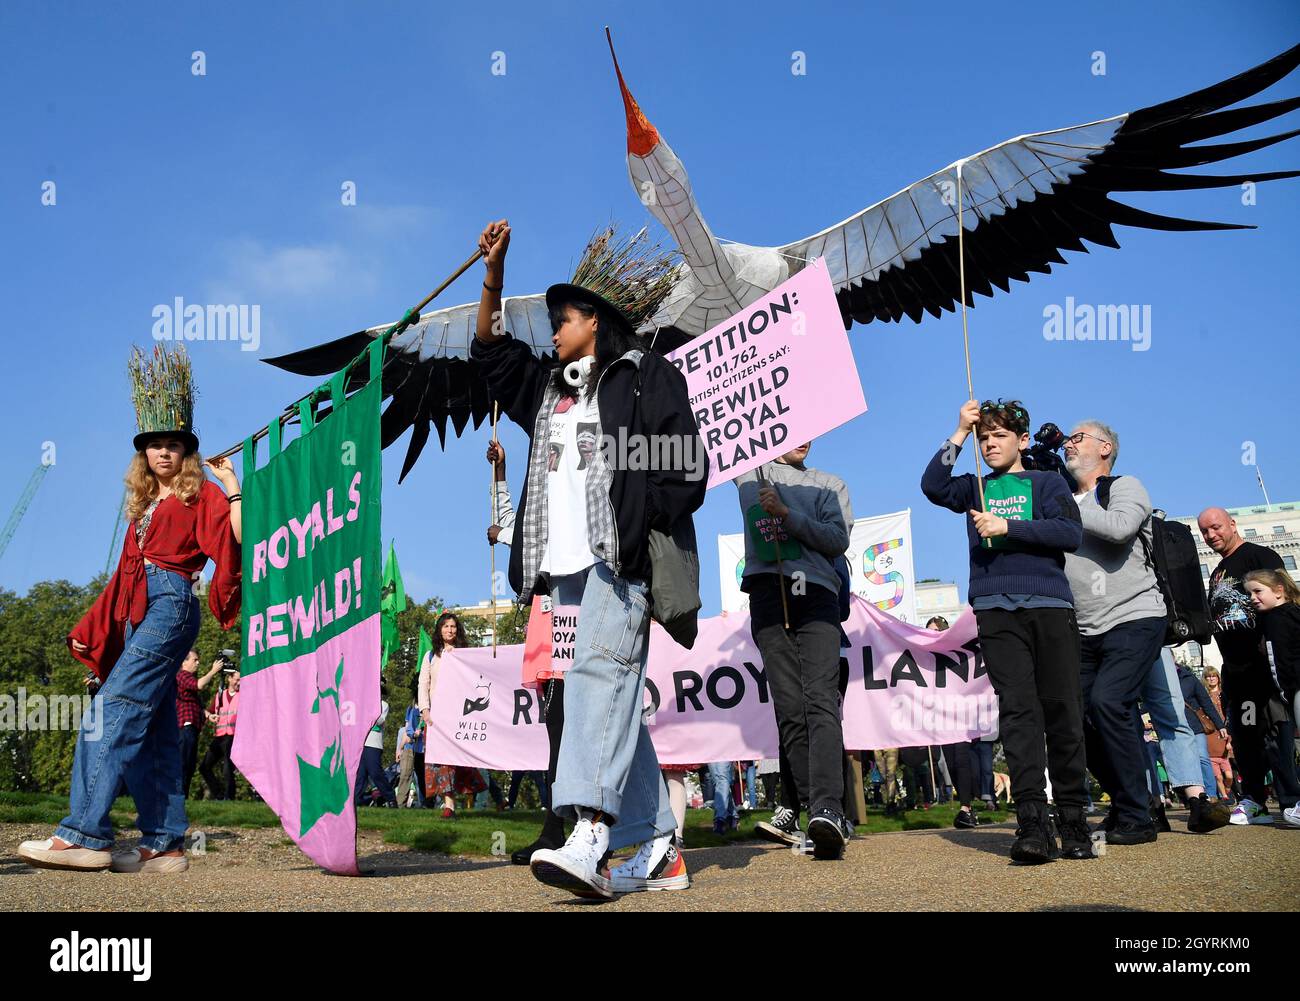 Environmental campaigners part in a march and delivery of a petition to the Buckingham Palace, demanding that the British royal family rewild their land, ahead of the COP26 climate summit due to take place in November, in London, Britain, October 9, 2021. REUTERS/Toby Melville Stock Photo